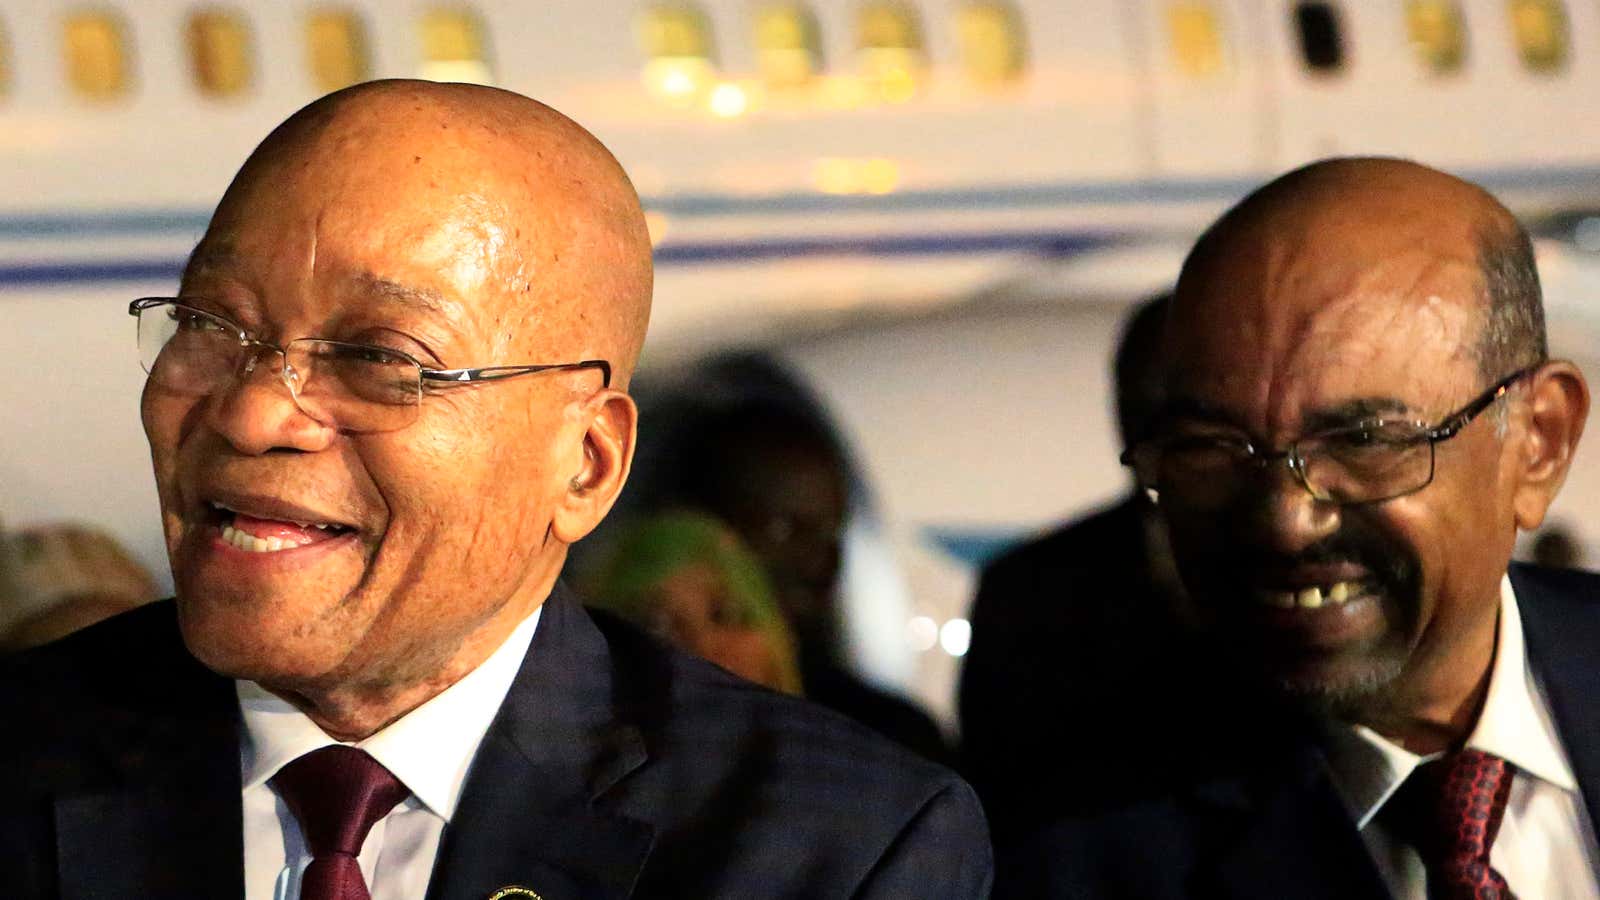 Sudanese president Omar al-Bashir’s visit motivated South Africa’s withdrawal.